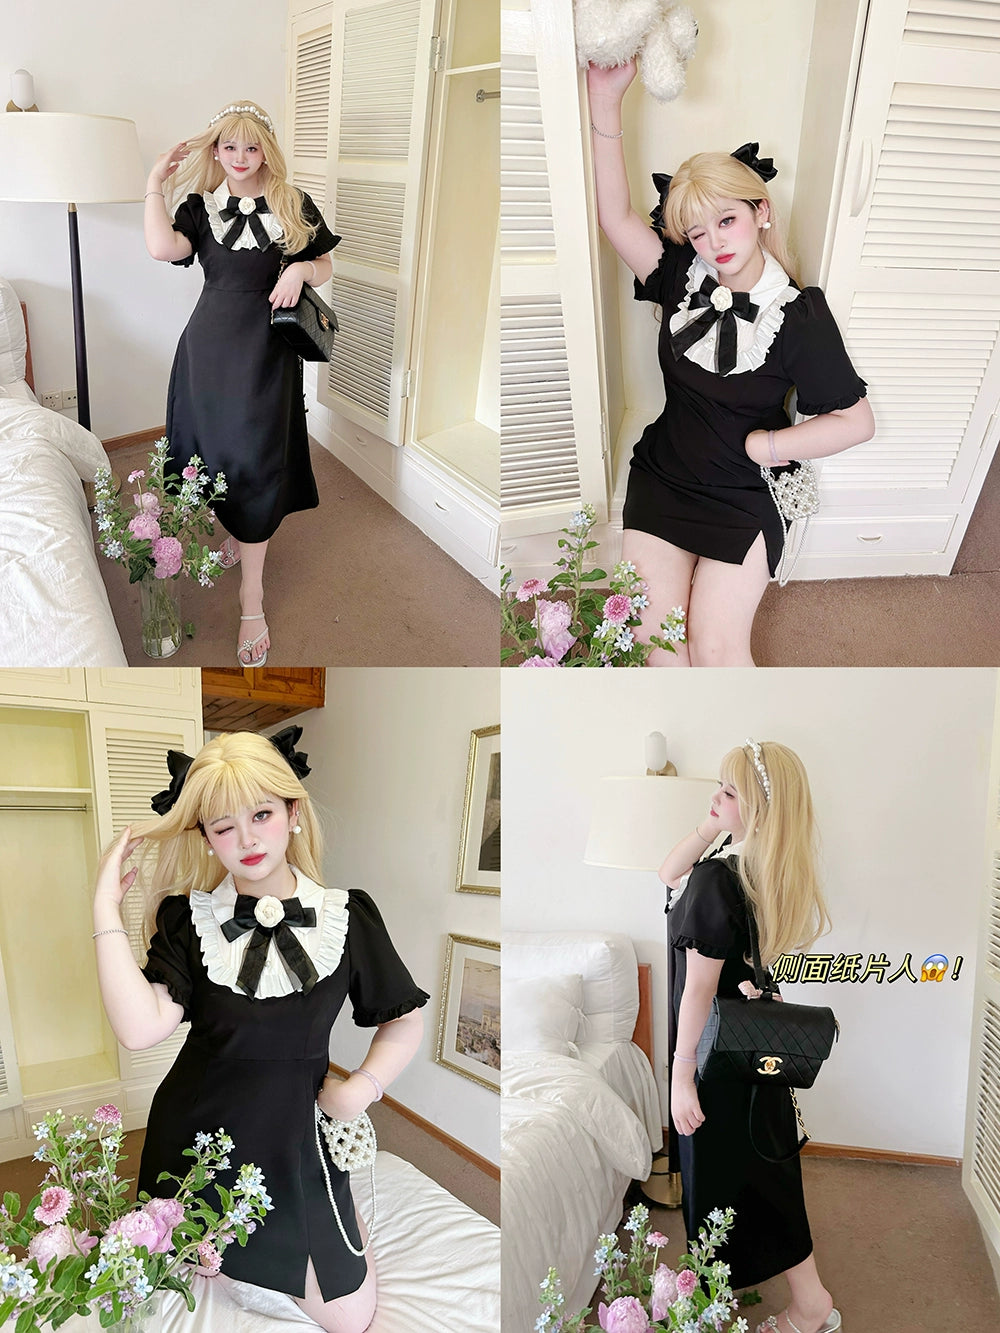 Plus Size Black Dress With Bow Tie And Rose 22060:323900